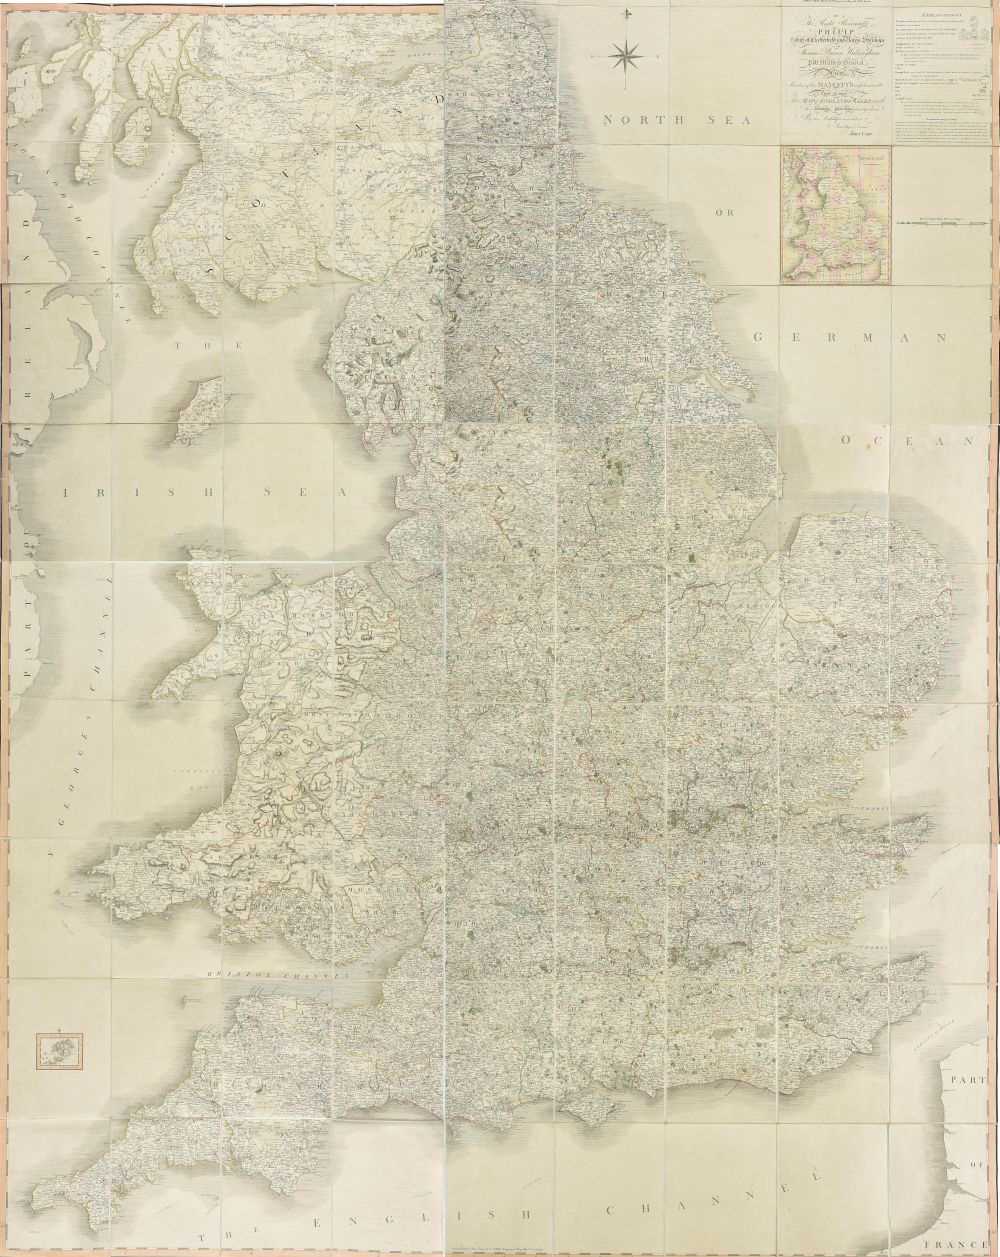 Lot 30 - England & Wales. Cary (John), Cary's New Map of England and Wales, 1794